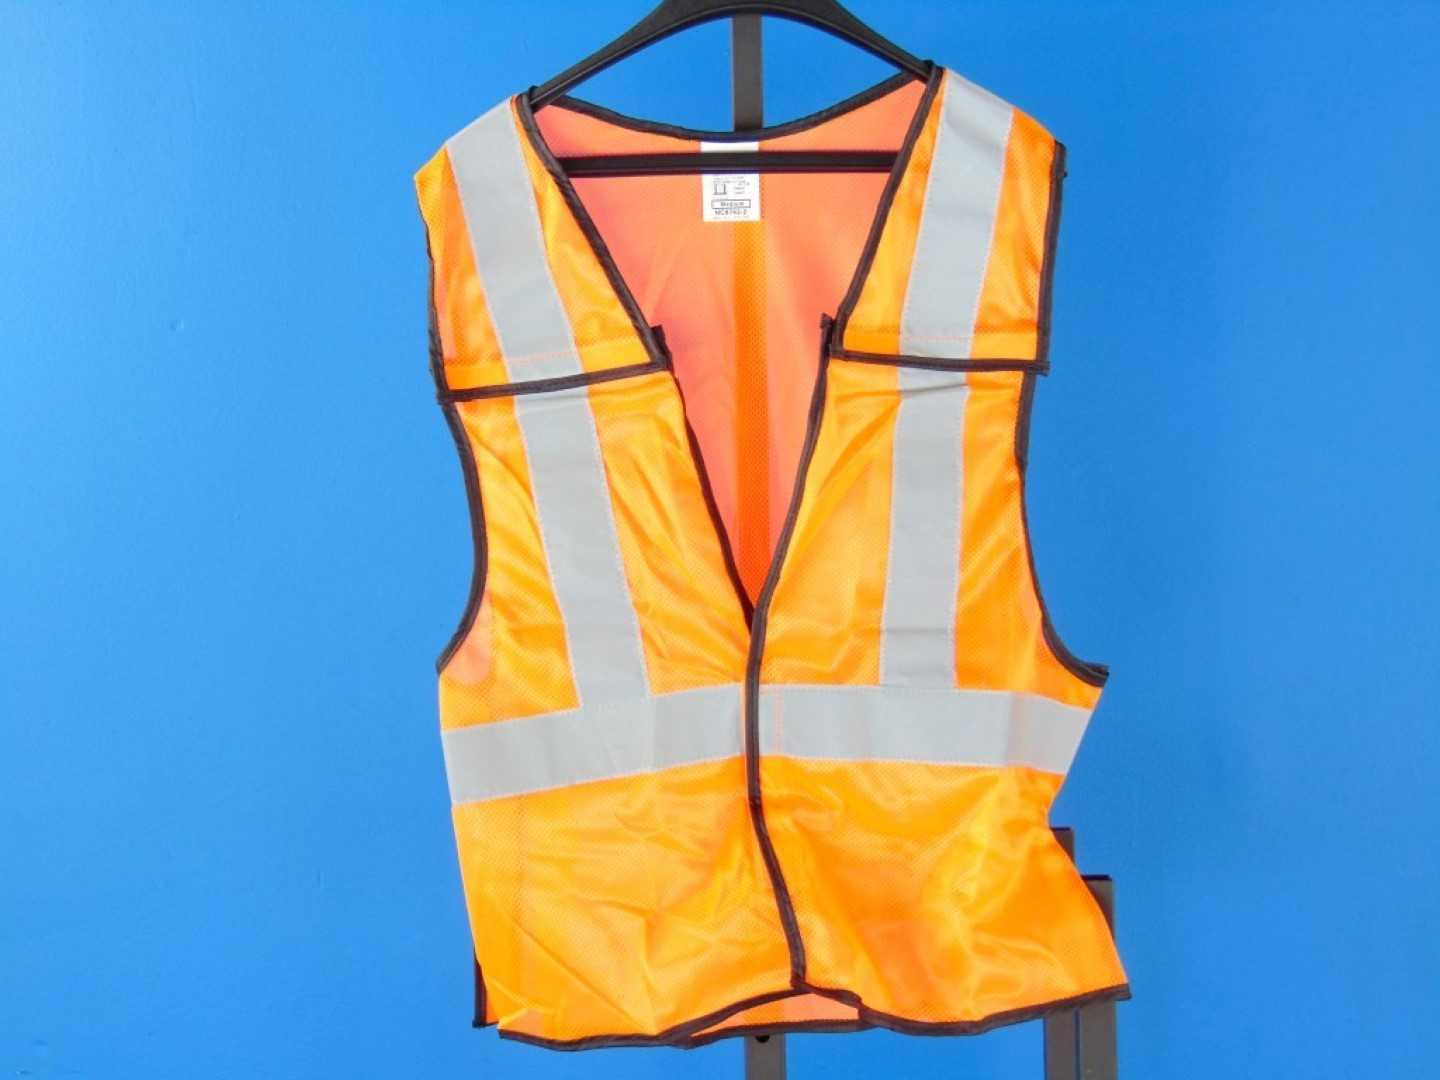 Poly Mesh ANSI/ISEA 107-2004 Comp. Safety Vest Reflective Breakaway 4XL